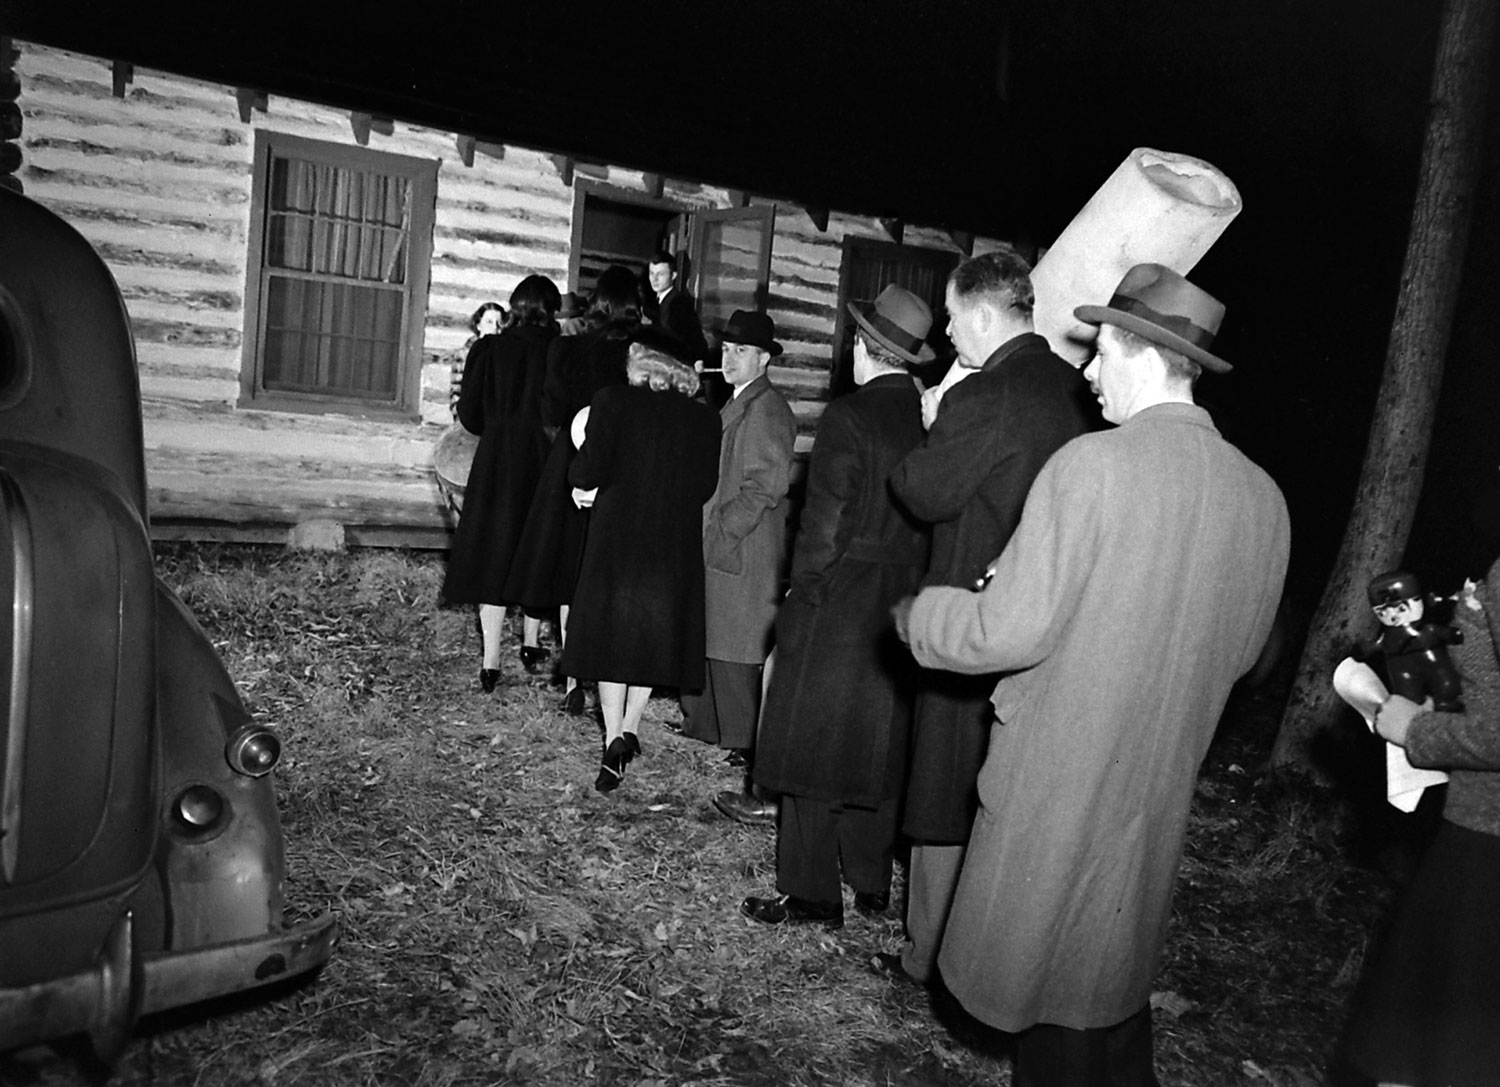 Revelers make their way to a "Hitler hex party" in the Maryland Woods, 1941.